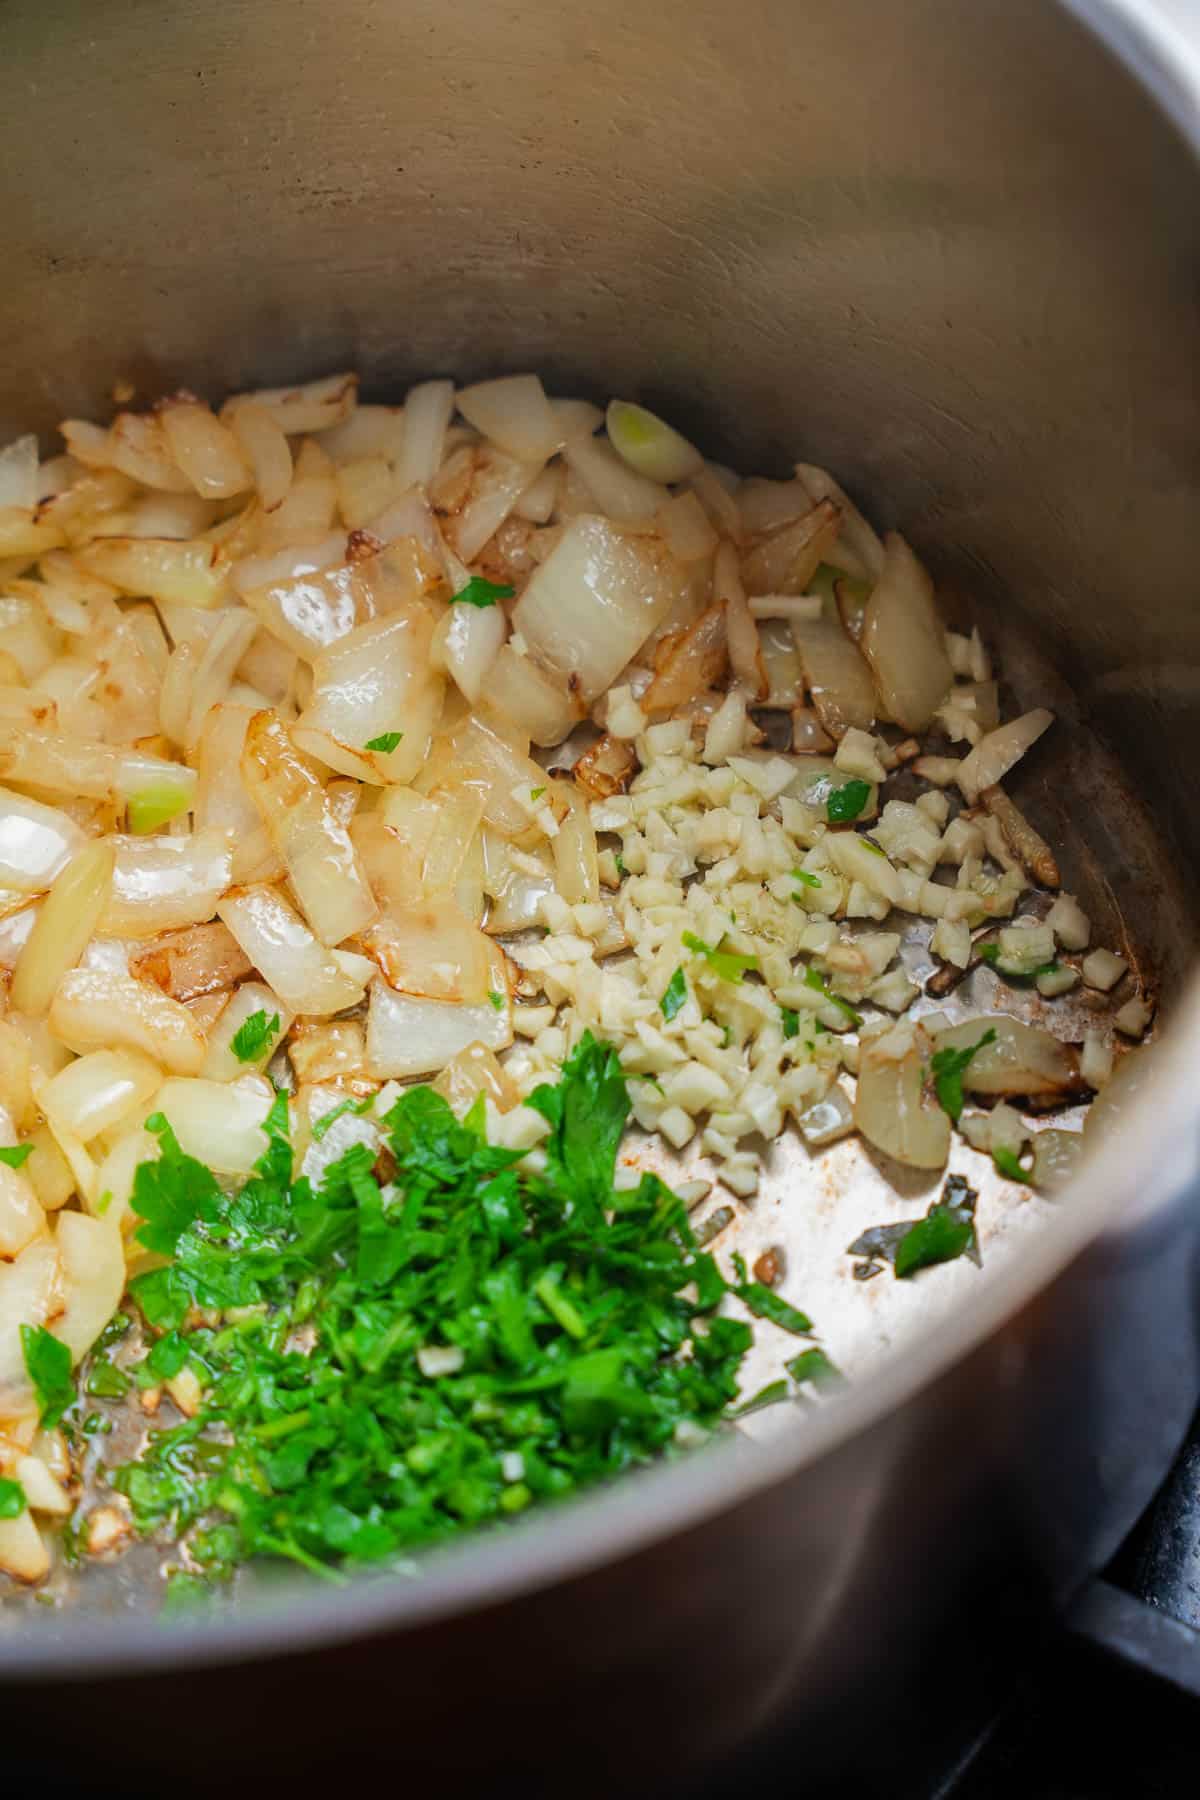 Garlic and parsley are added to the cooking onions in a stainless steel pot.